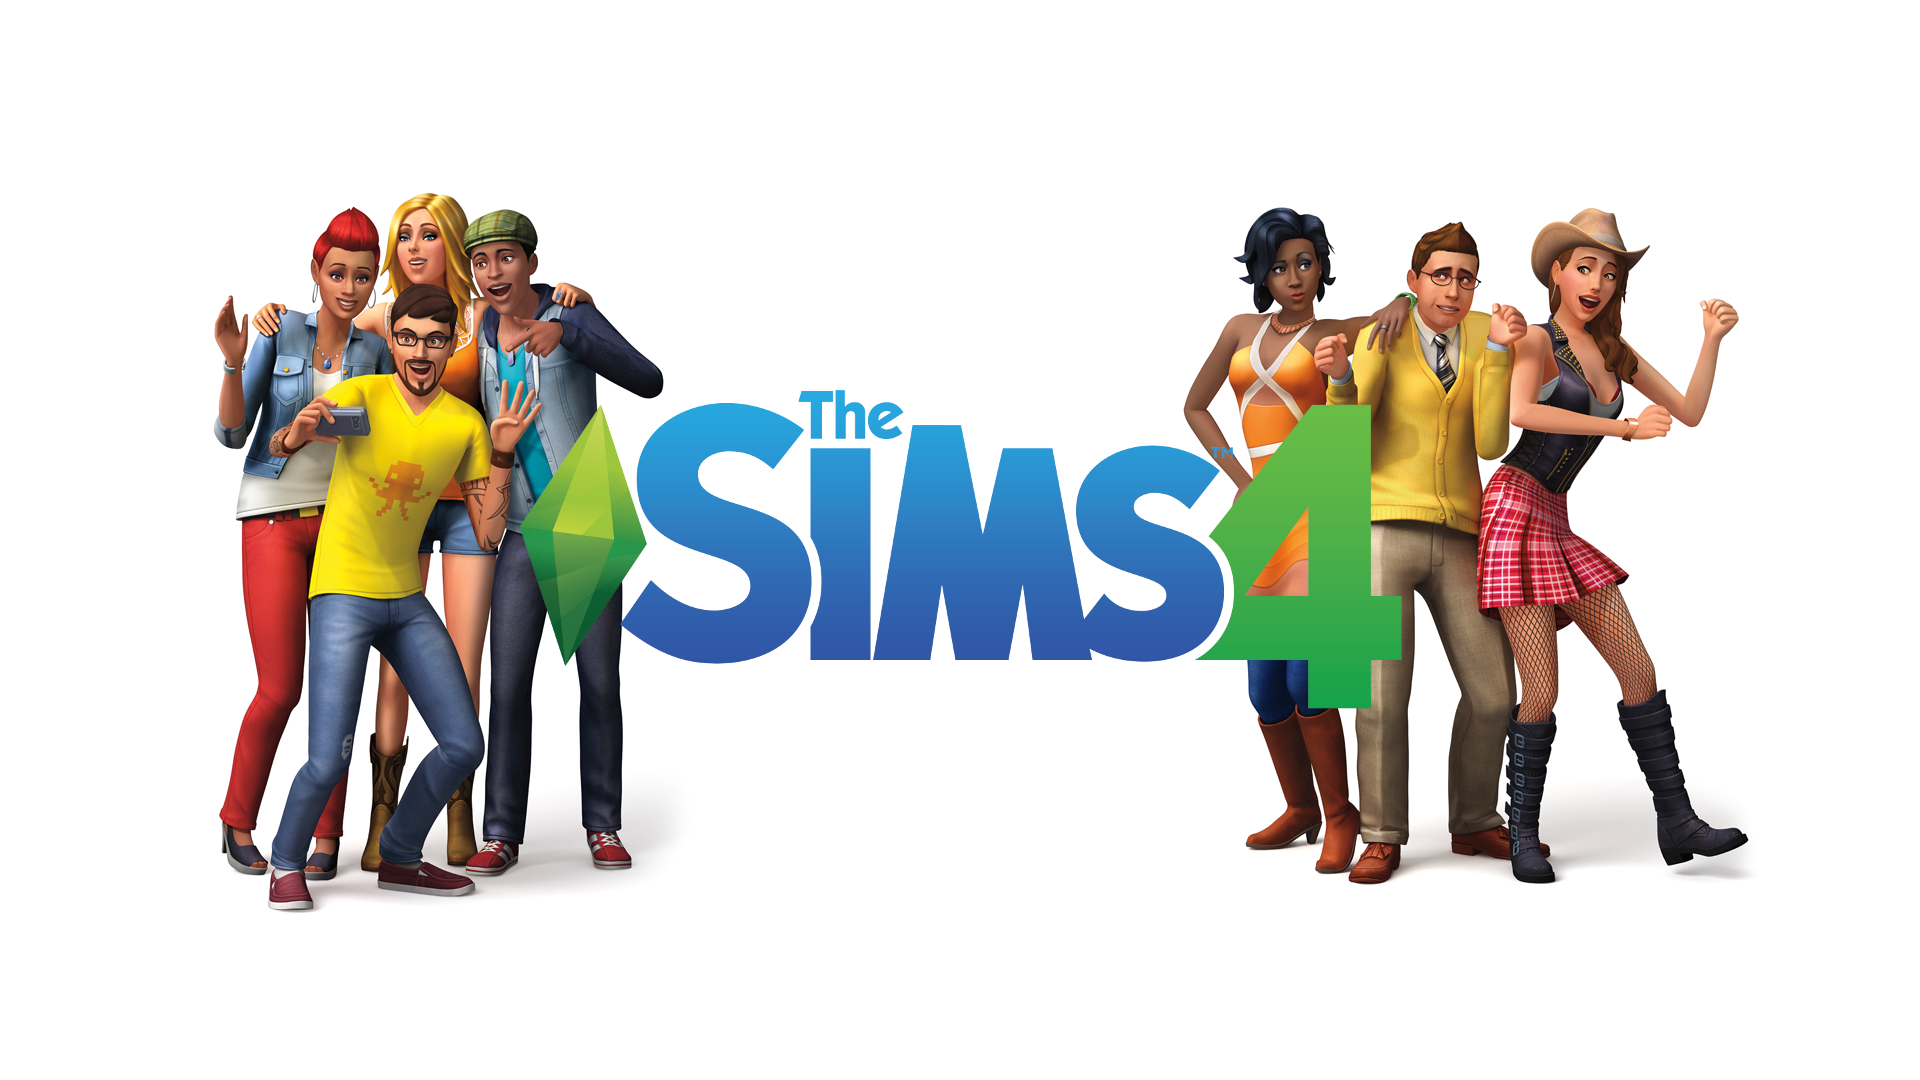 the sims 1 1920x1080